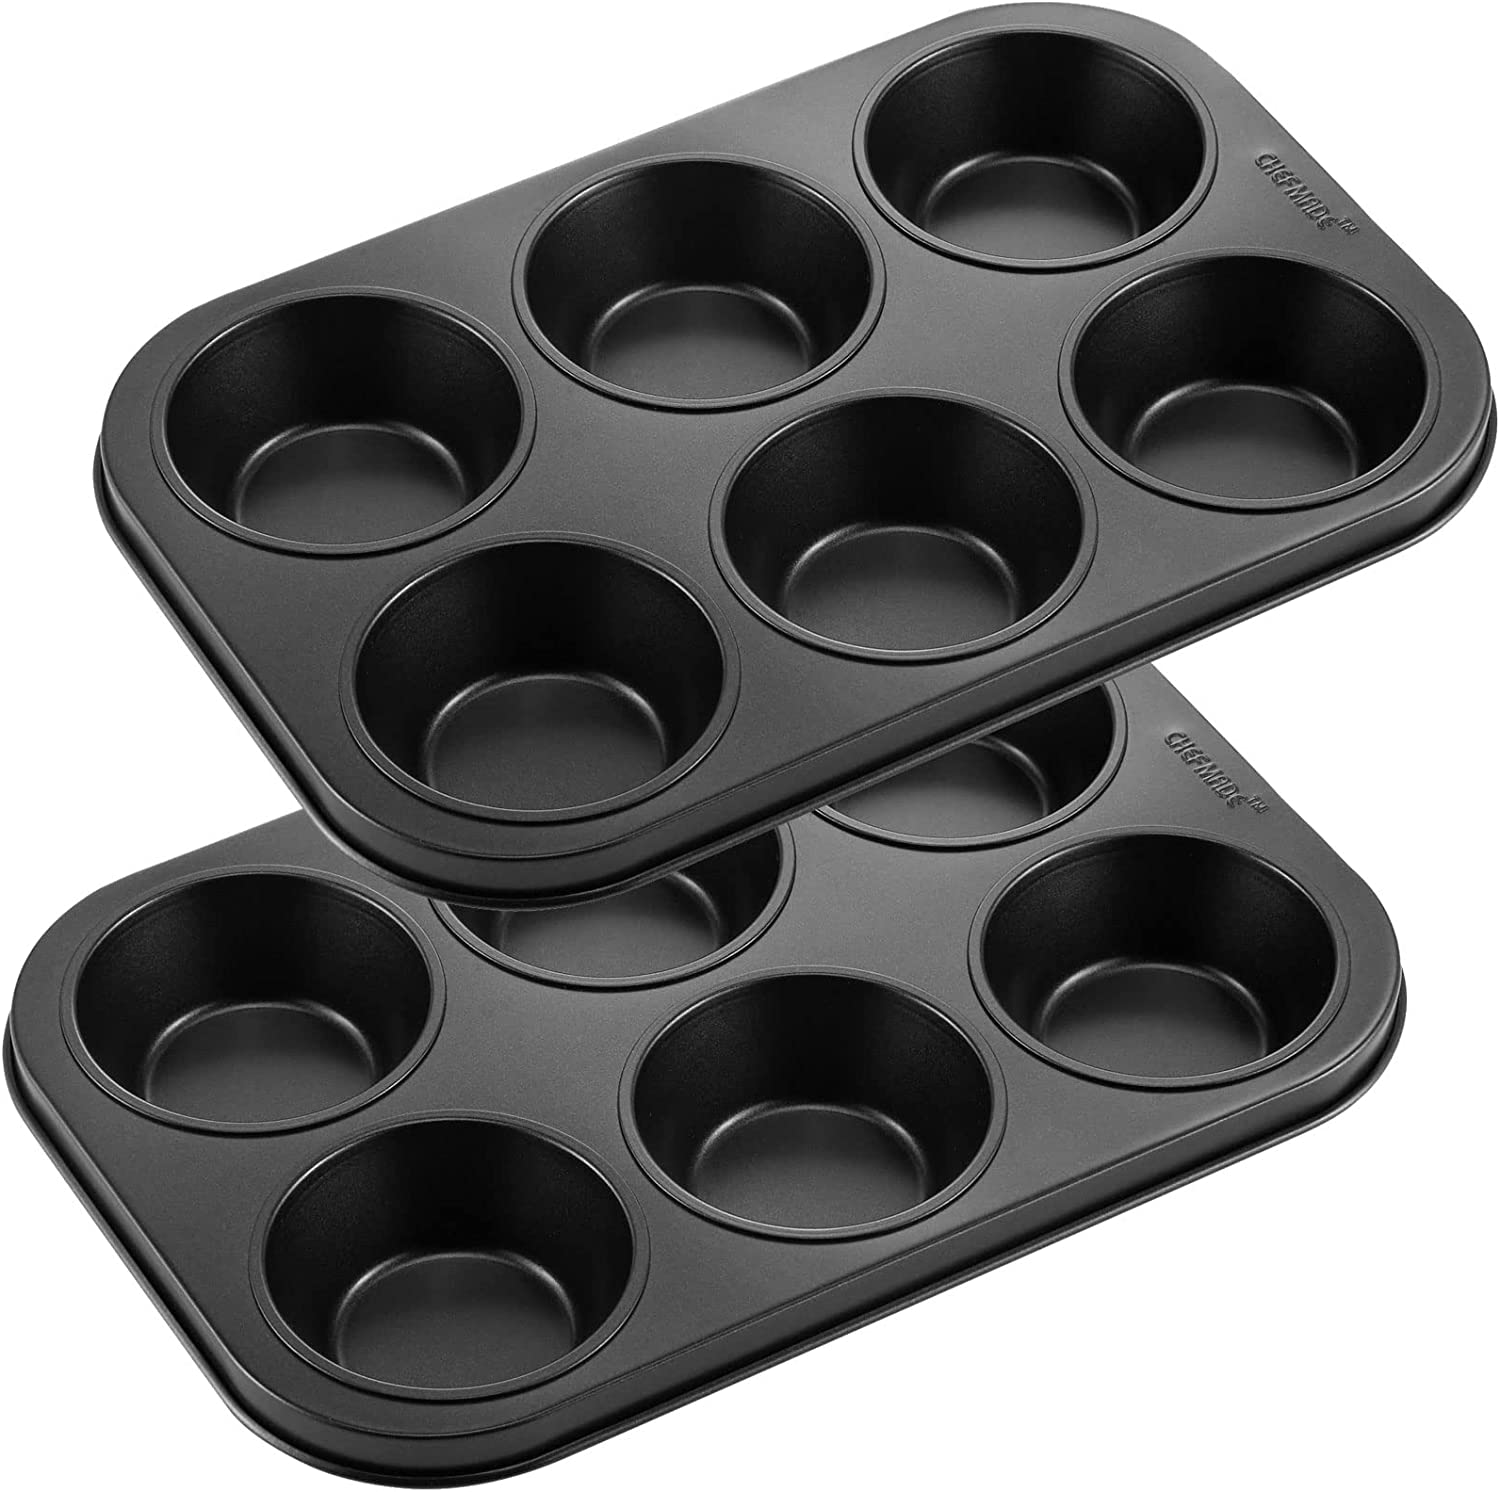 Popover Pan Media 6 Well - CHEFMADE official store